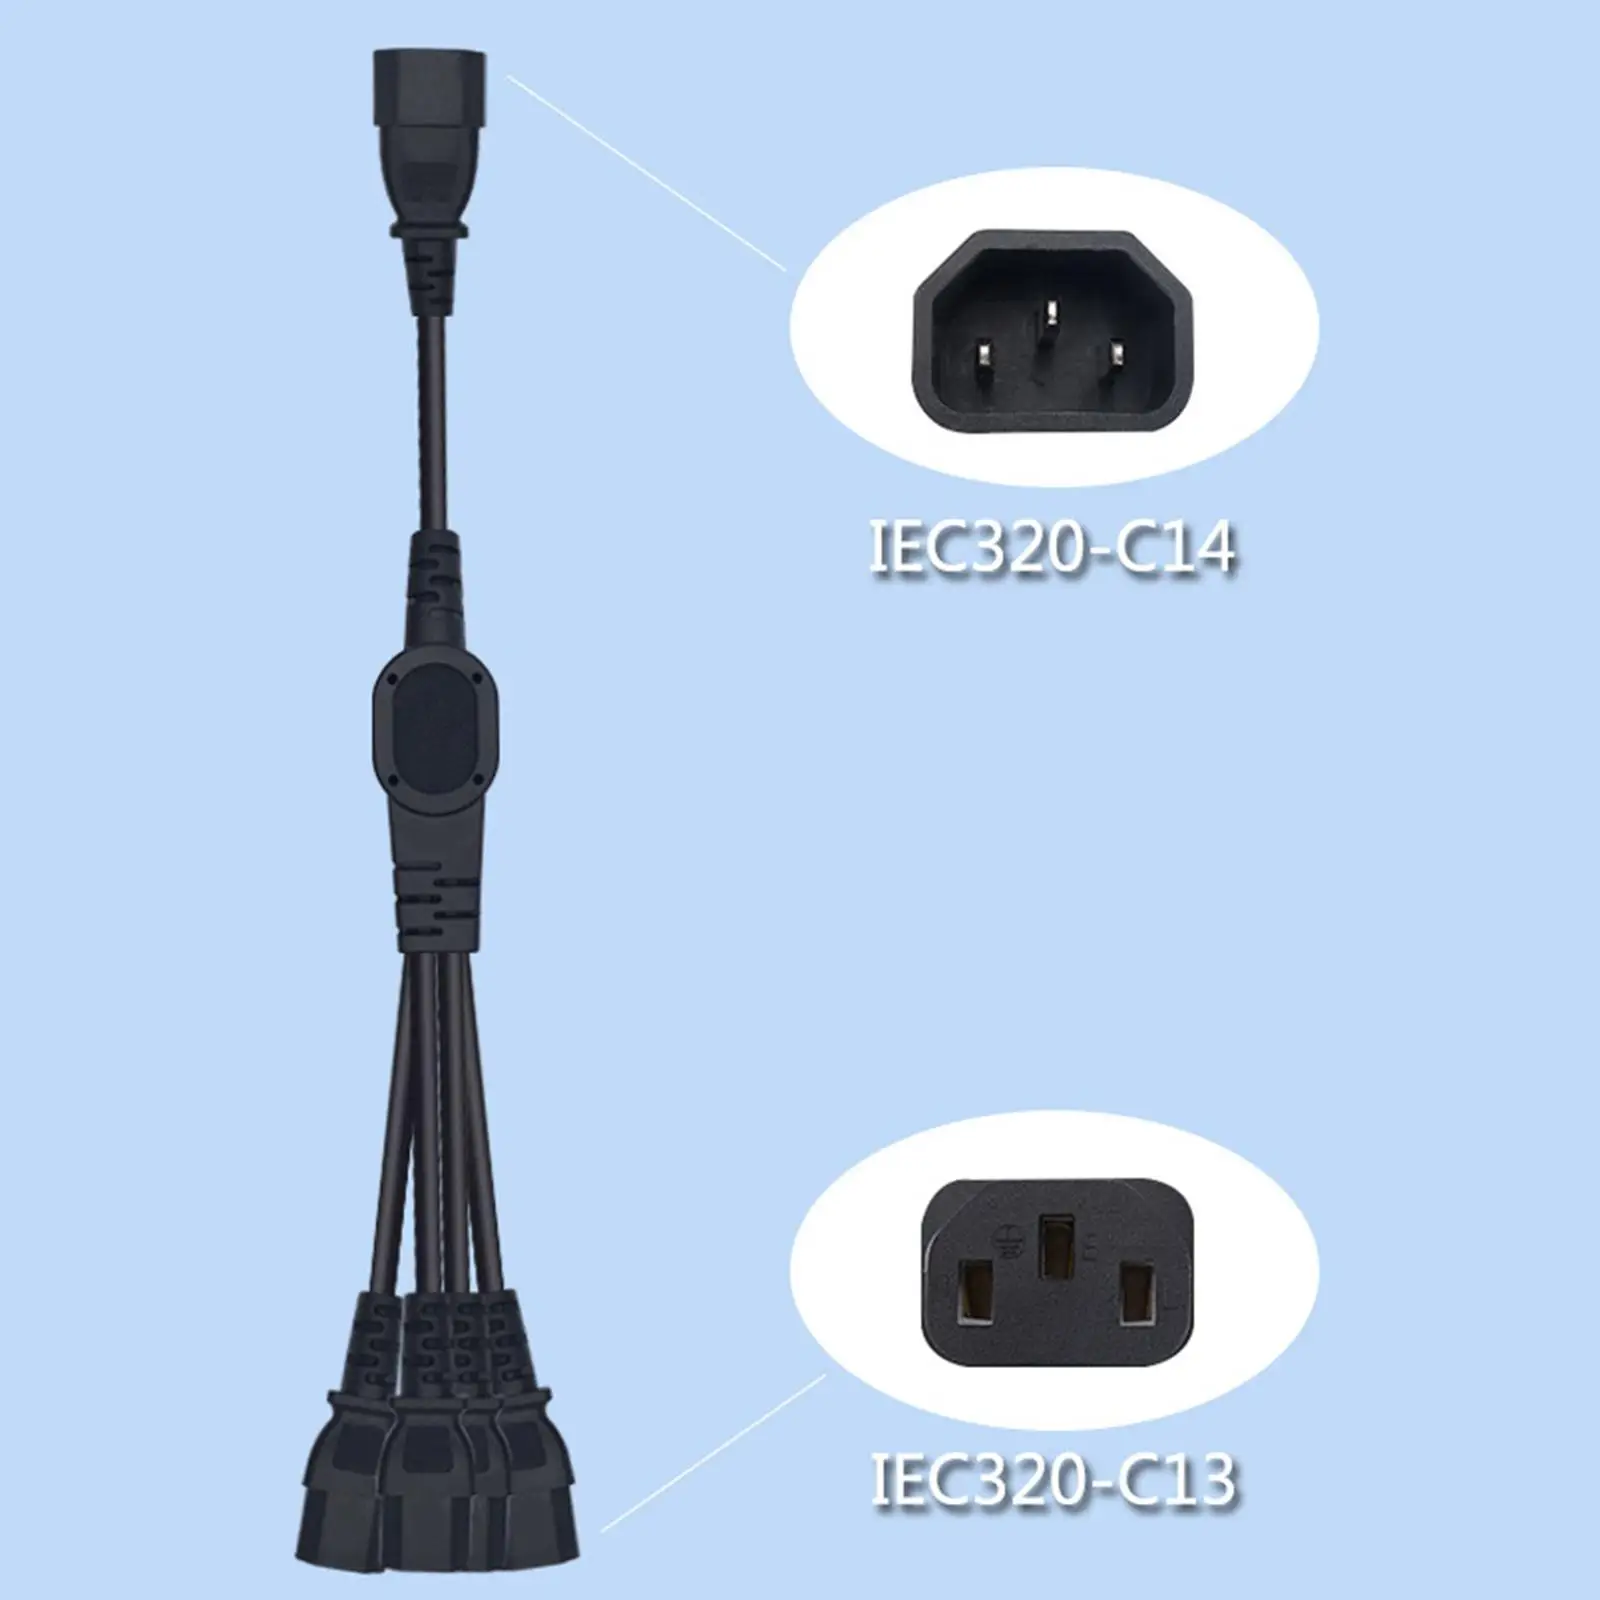 4 in 1 C14 to 4 x C13 Power Adapter Cable Cord IEC320 C14-Iec320 4*C13 Durable IEC320-C14 (Male) to 4x C13 (Female) for Ups Host